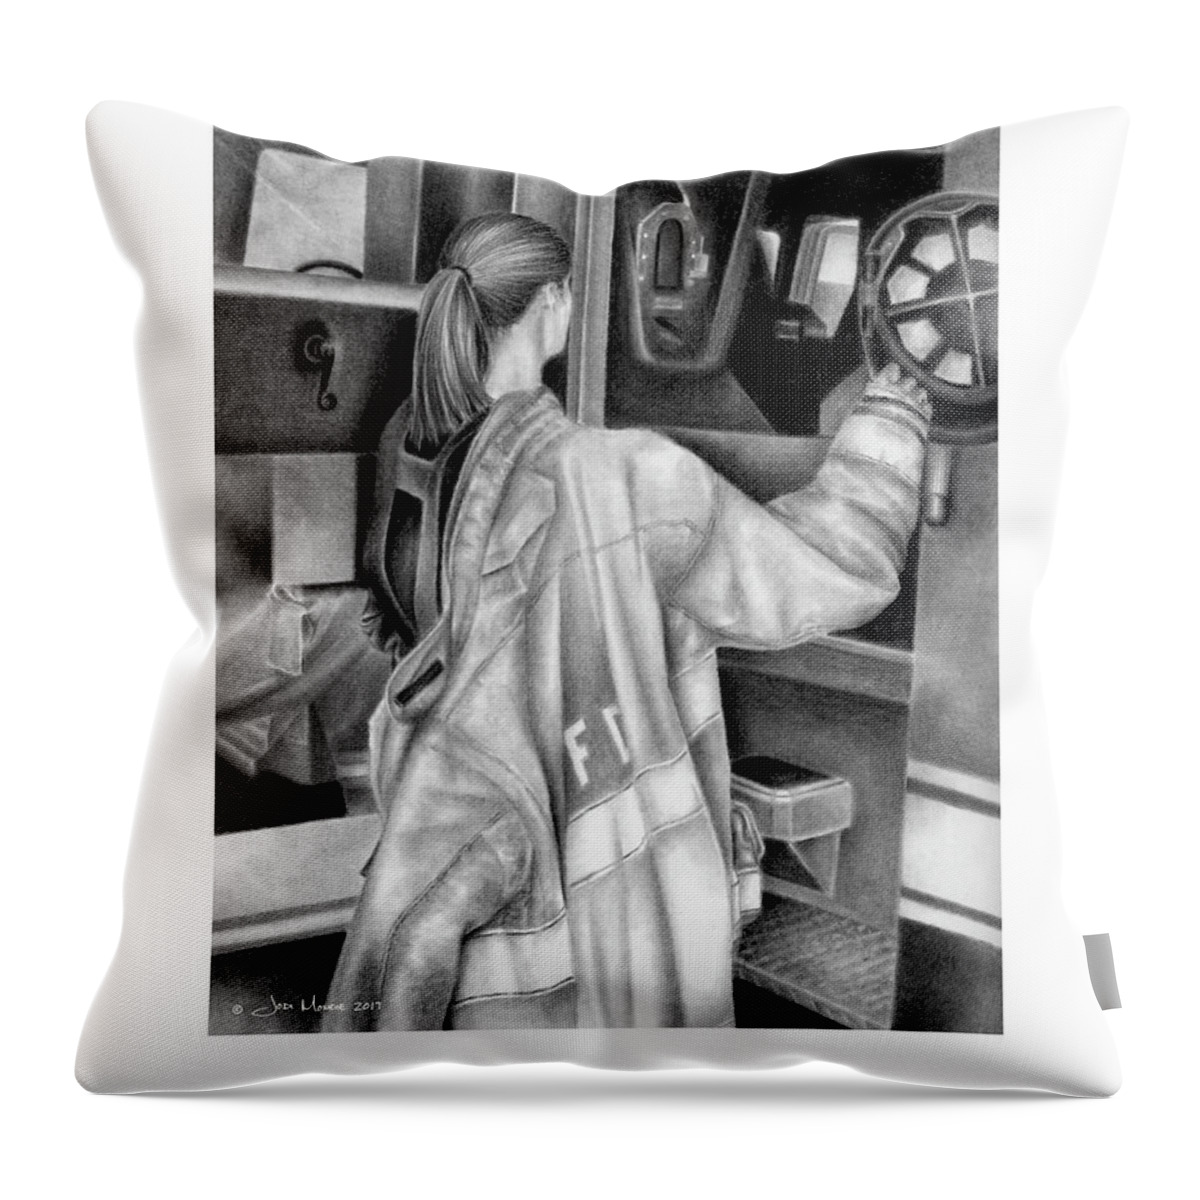 Firefighter Throw Pillow featuring the drawing When the Tones Drop by Jodi Monroe